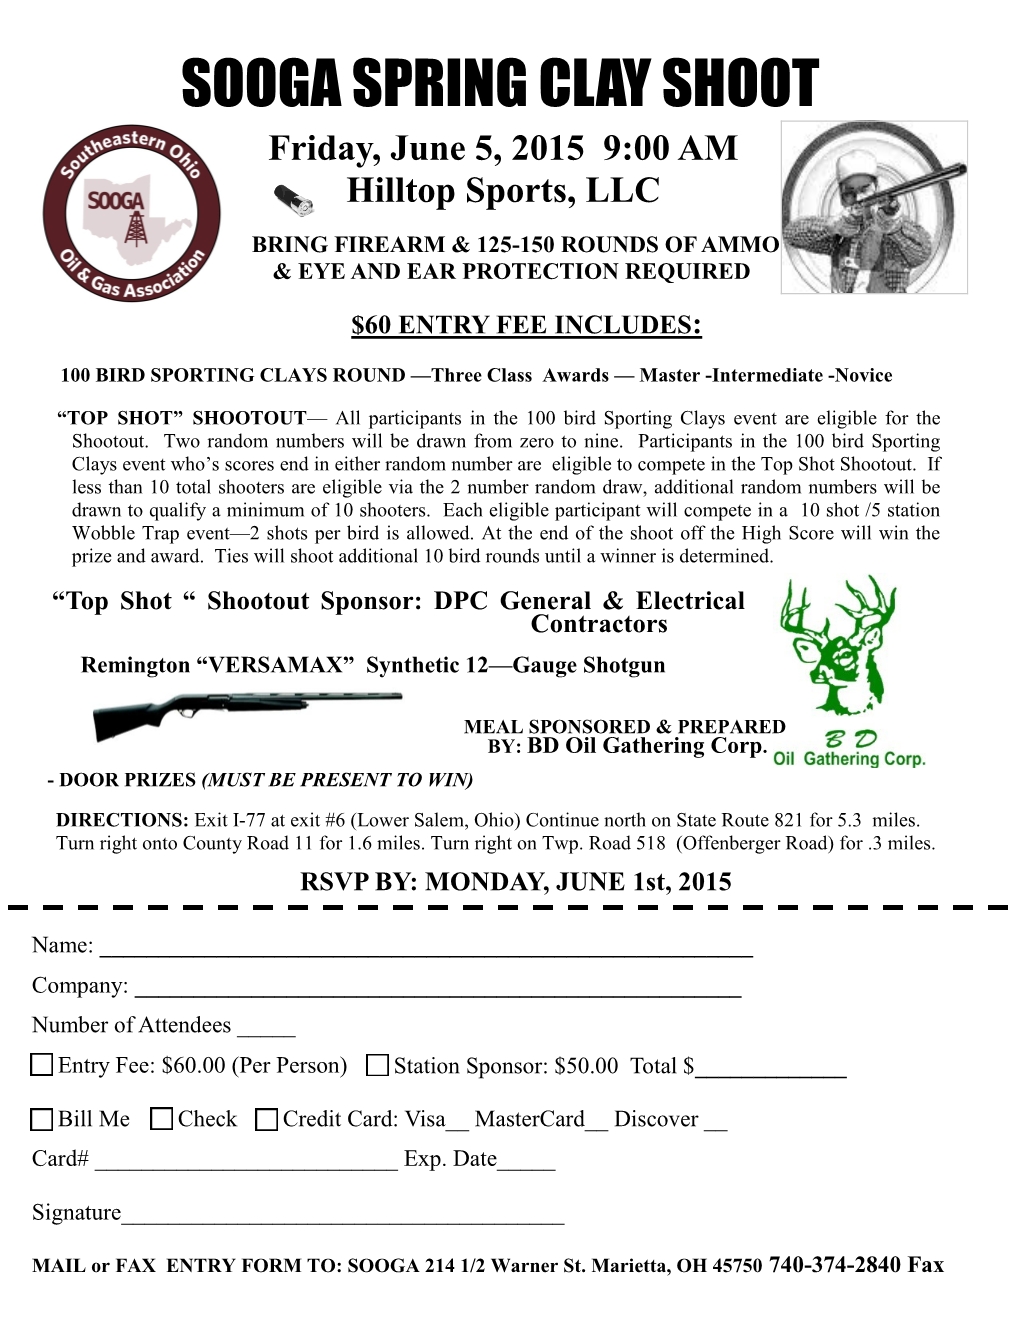 SOOGA SPRING CLAY SHOOT Friday, June 5, 2015 9:00 AM Hilltop Sports, LLC BRING FIREARM & 125-150 ROUNDS of AMMO & EYE and EAR PROTECTION REQUIRED